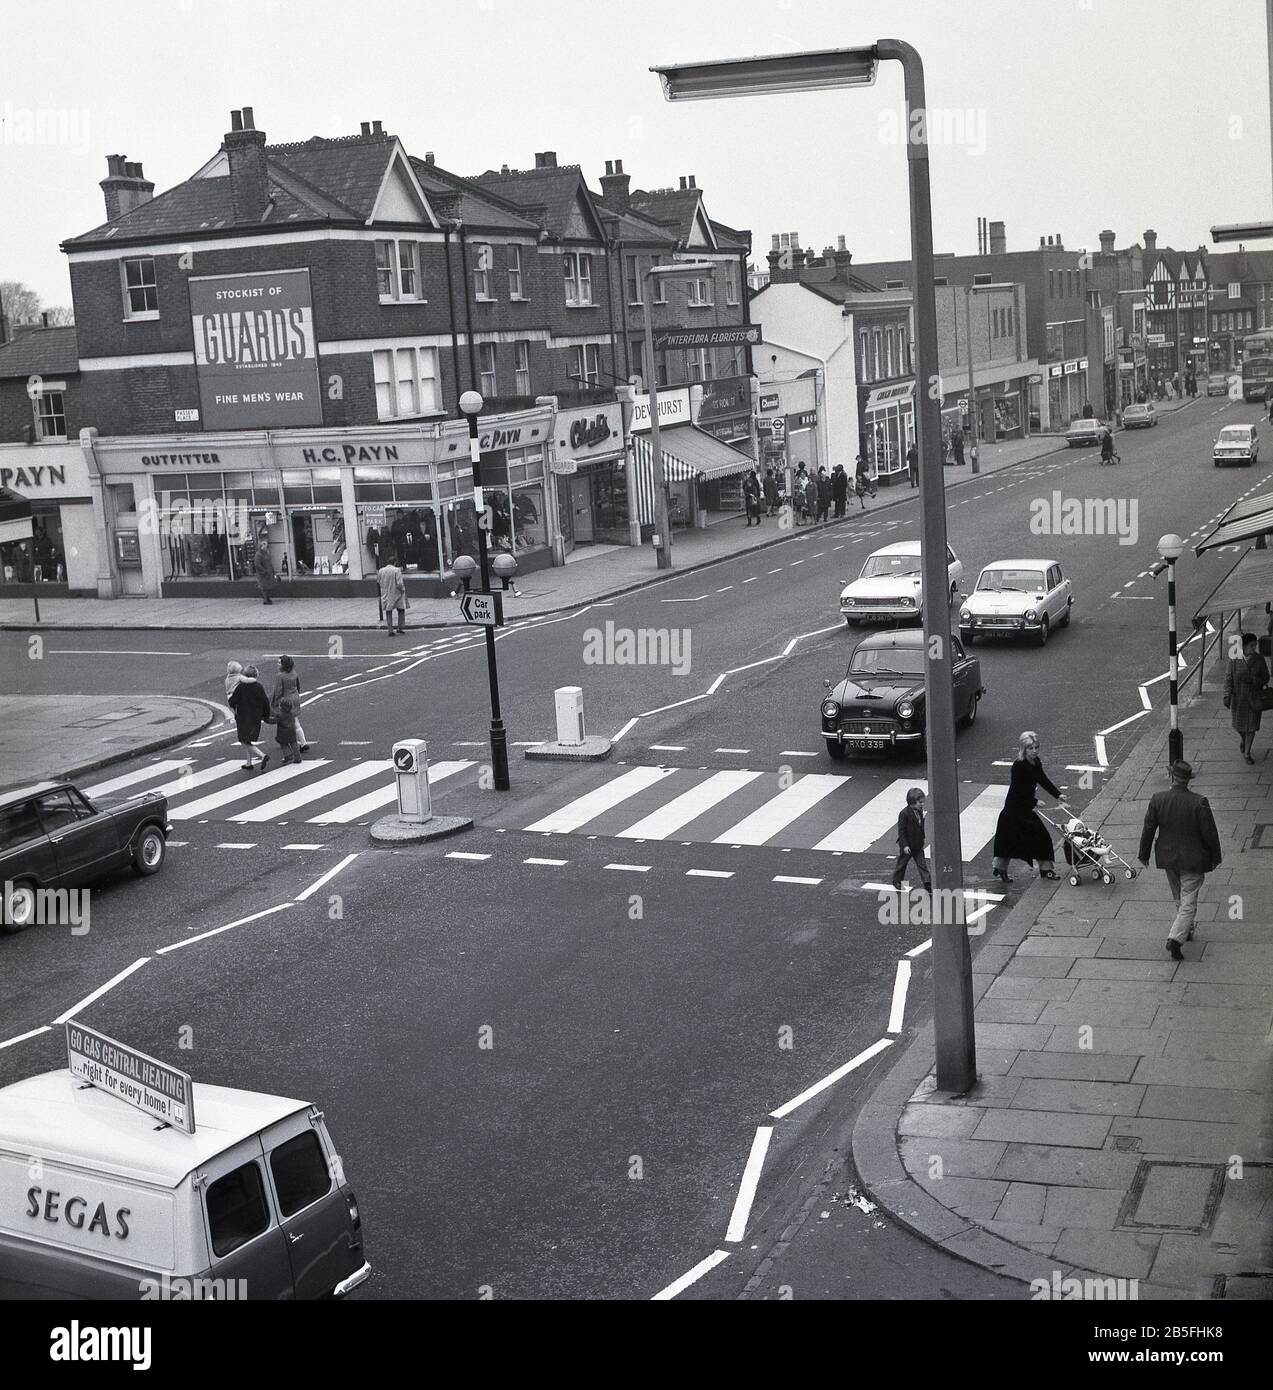 Aerial view of a new road safety measure, a zebra or pedestrian crossing on a busy south london high street, circa late 1960s. First introduced in the UK in 1949, a level crossing gives priority to pedestrians and were put in places where there were shops, schools and other amenities used by pedestrians. Motorists have to give way.  Motorcars of the era can be seen, with a Segas van on the left. Stock Photo